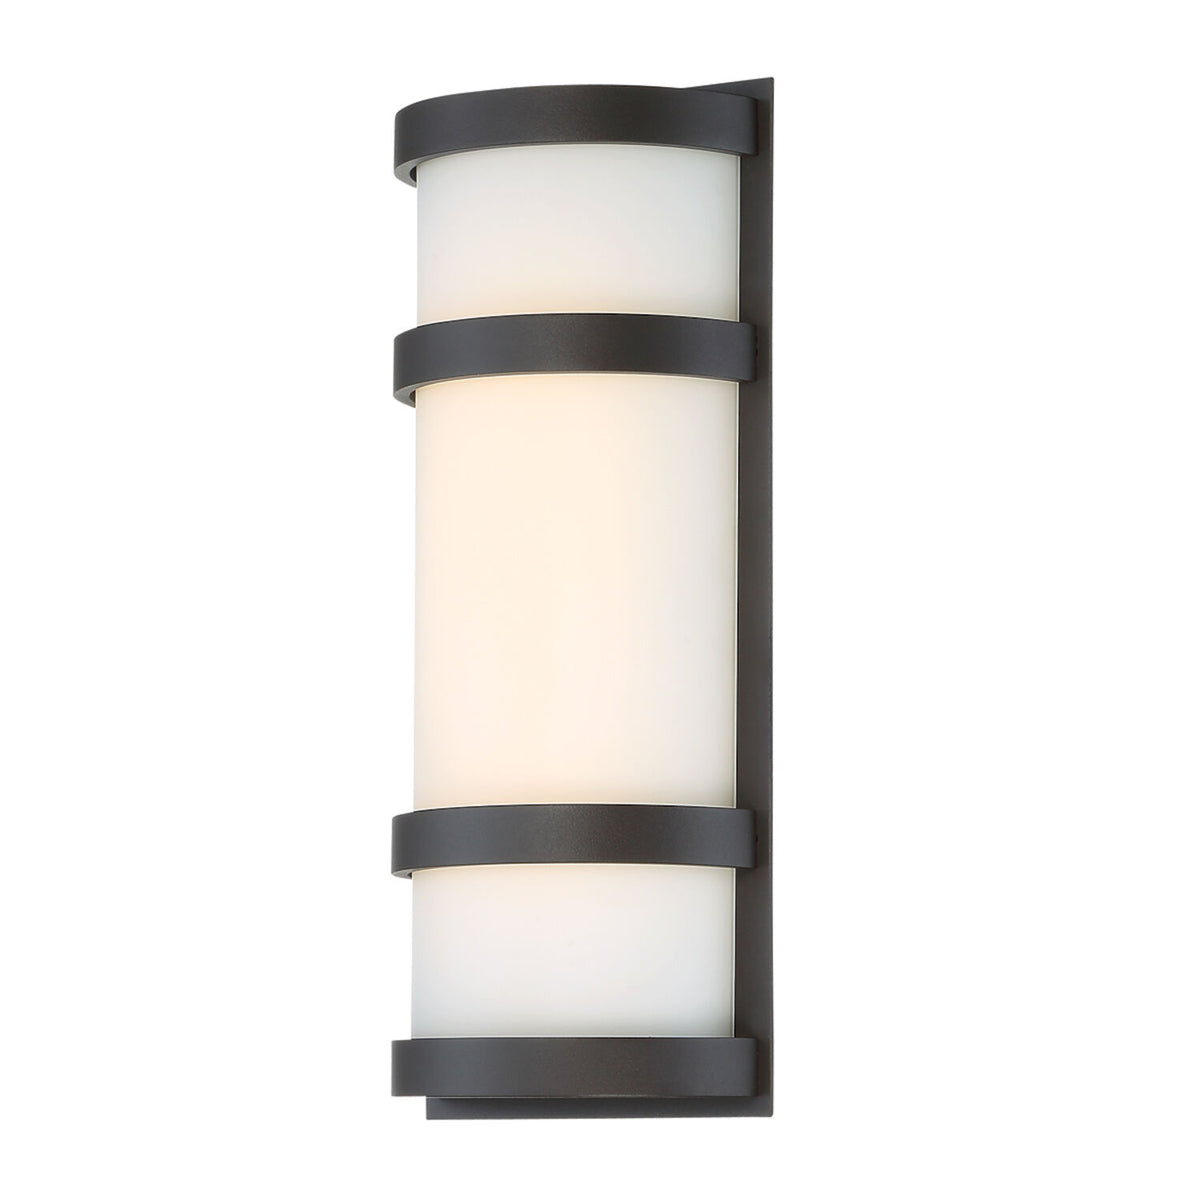 LATITUDE 14-INCH 3000K LED INDOOR AND OUTDOOR WALL LIGHT